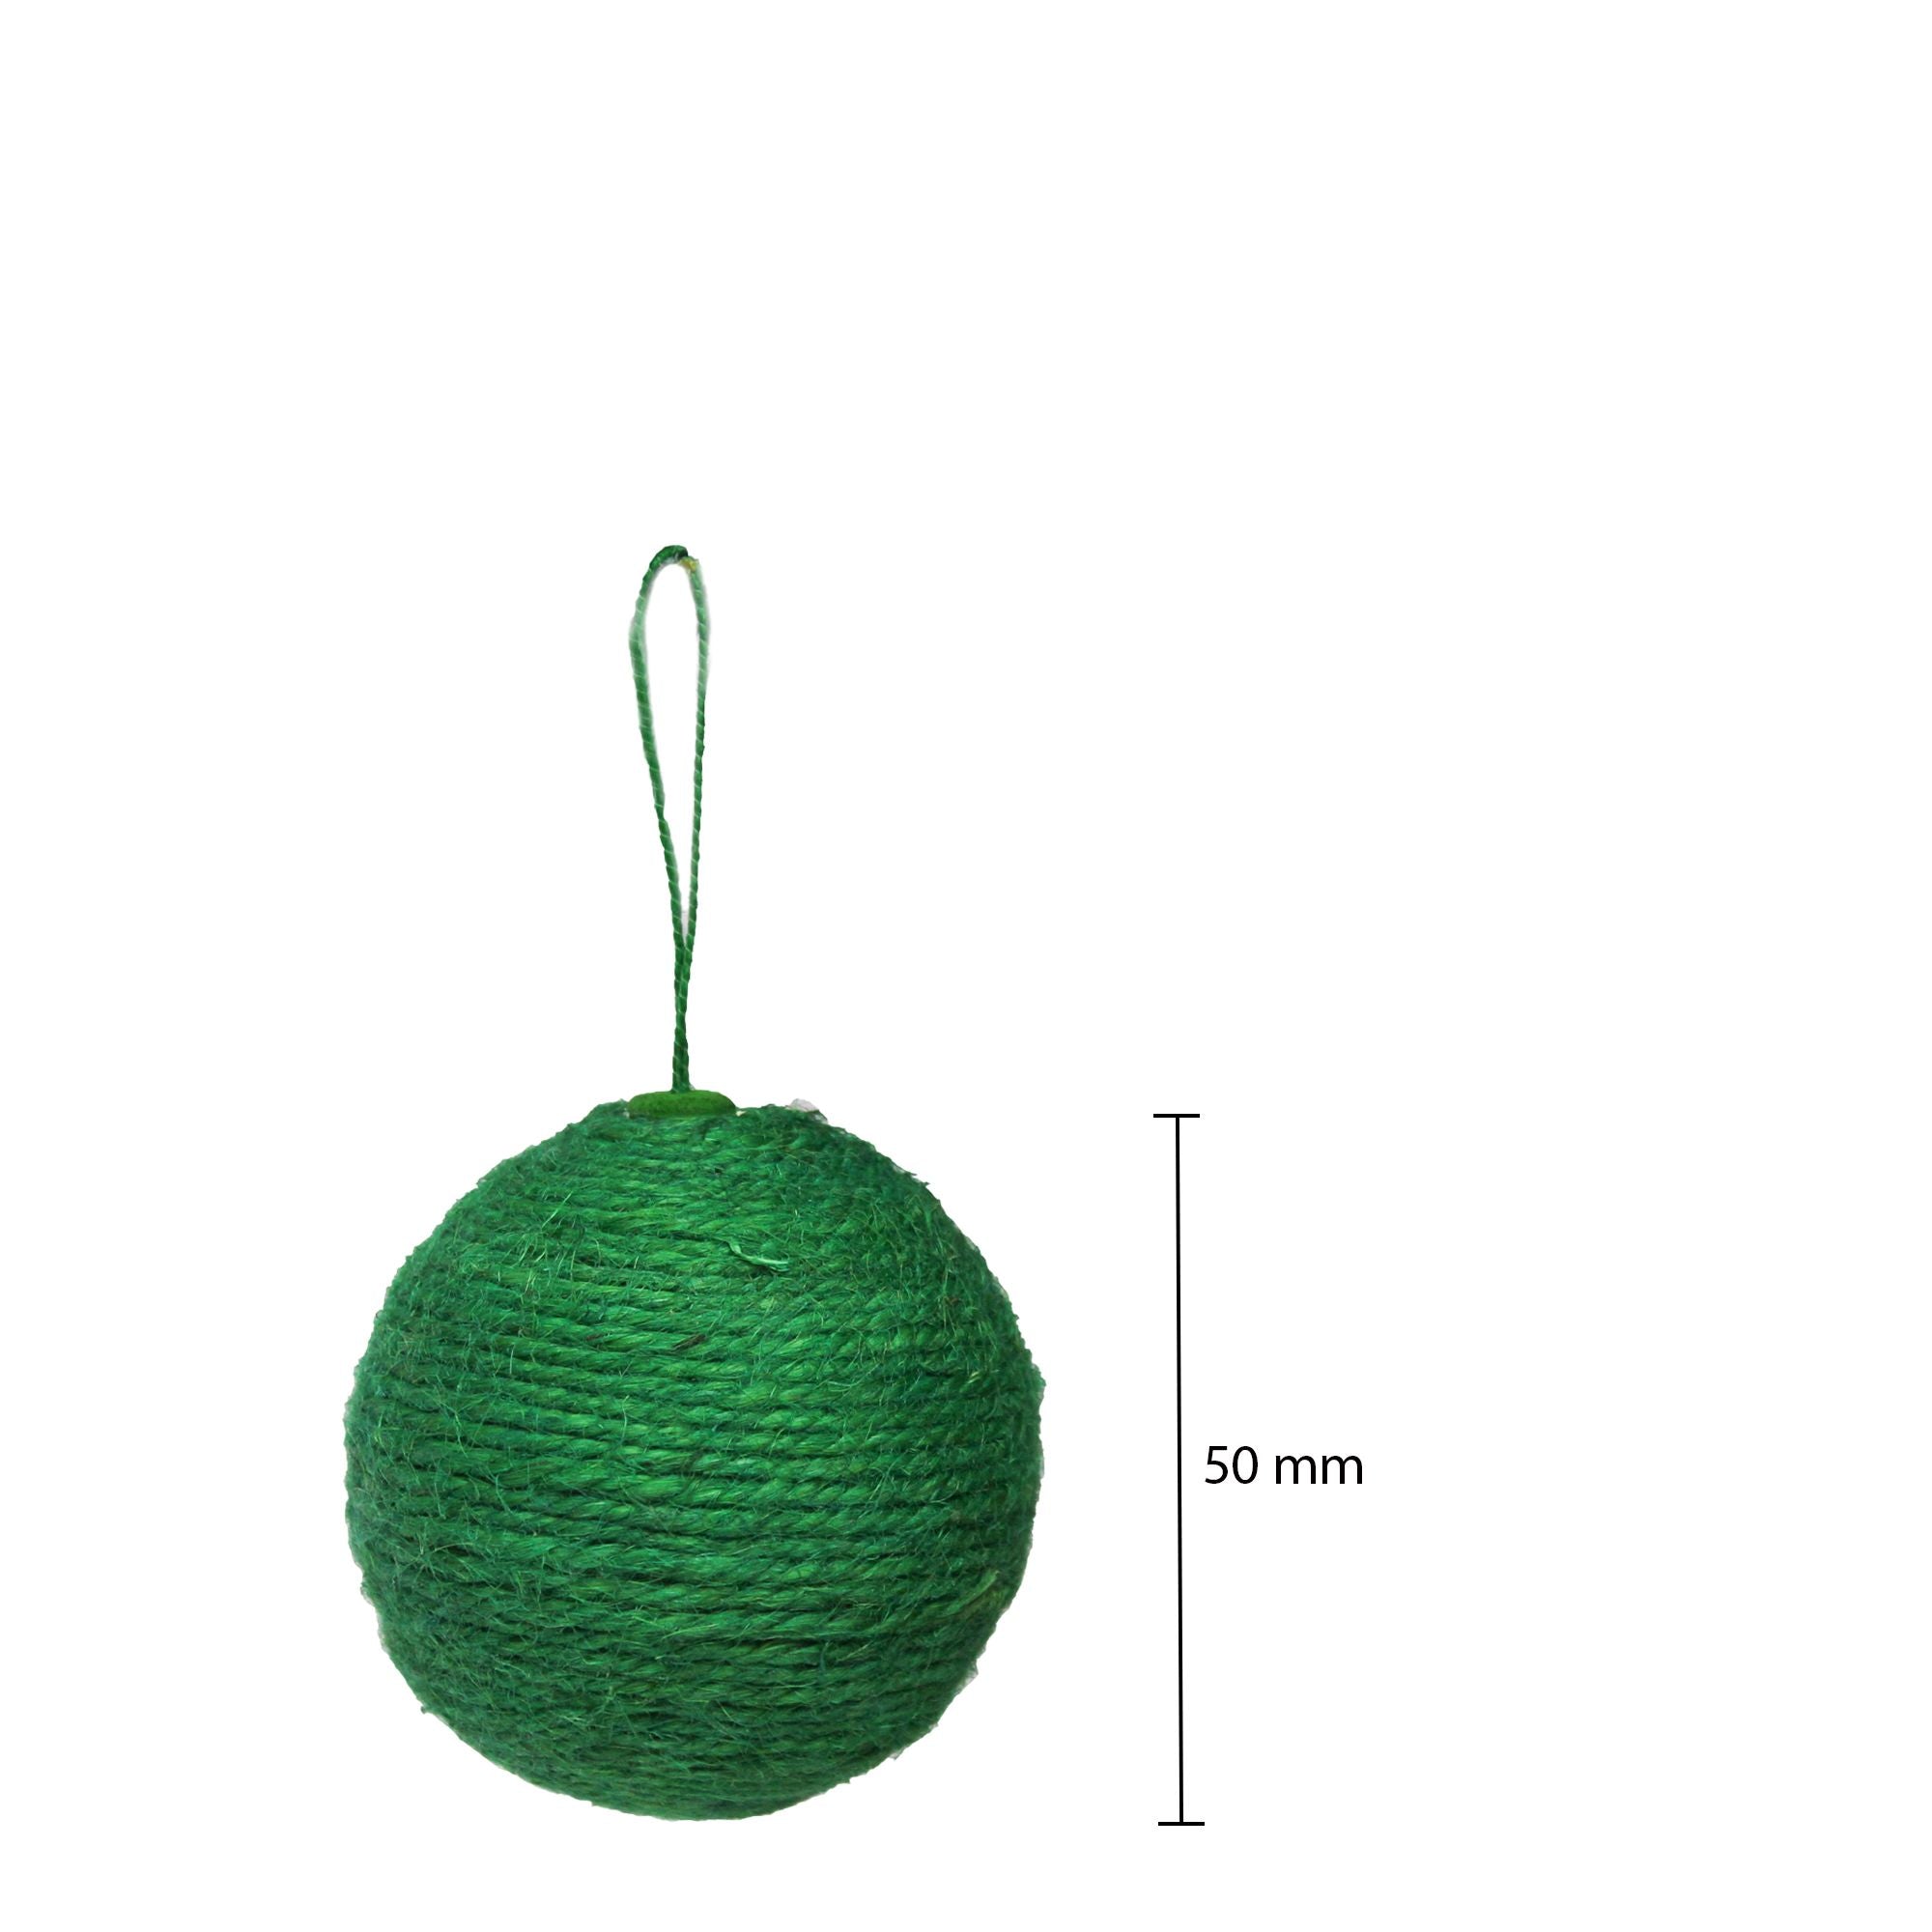 Handmade Christmas Ornaments - Jute Baubles, 50mm, Assorted Colours - Red, Green, 4pc